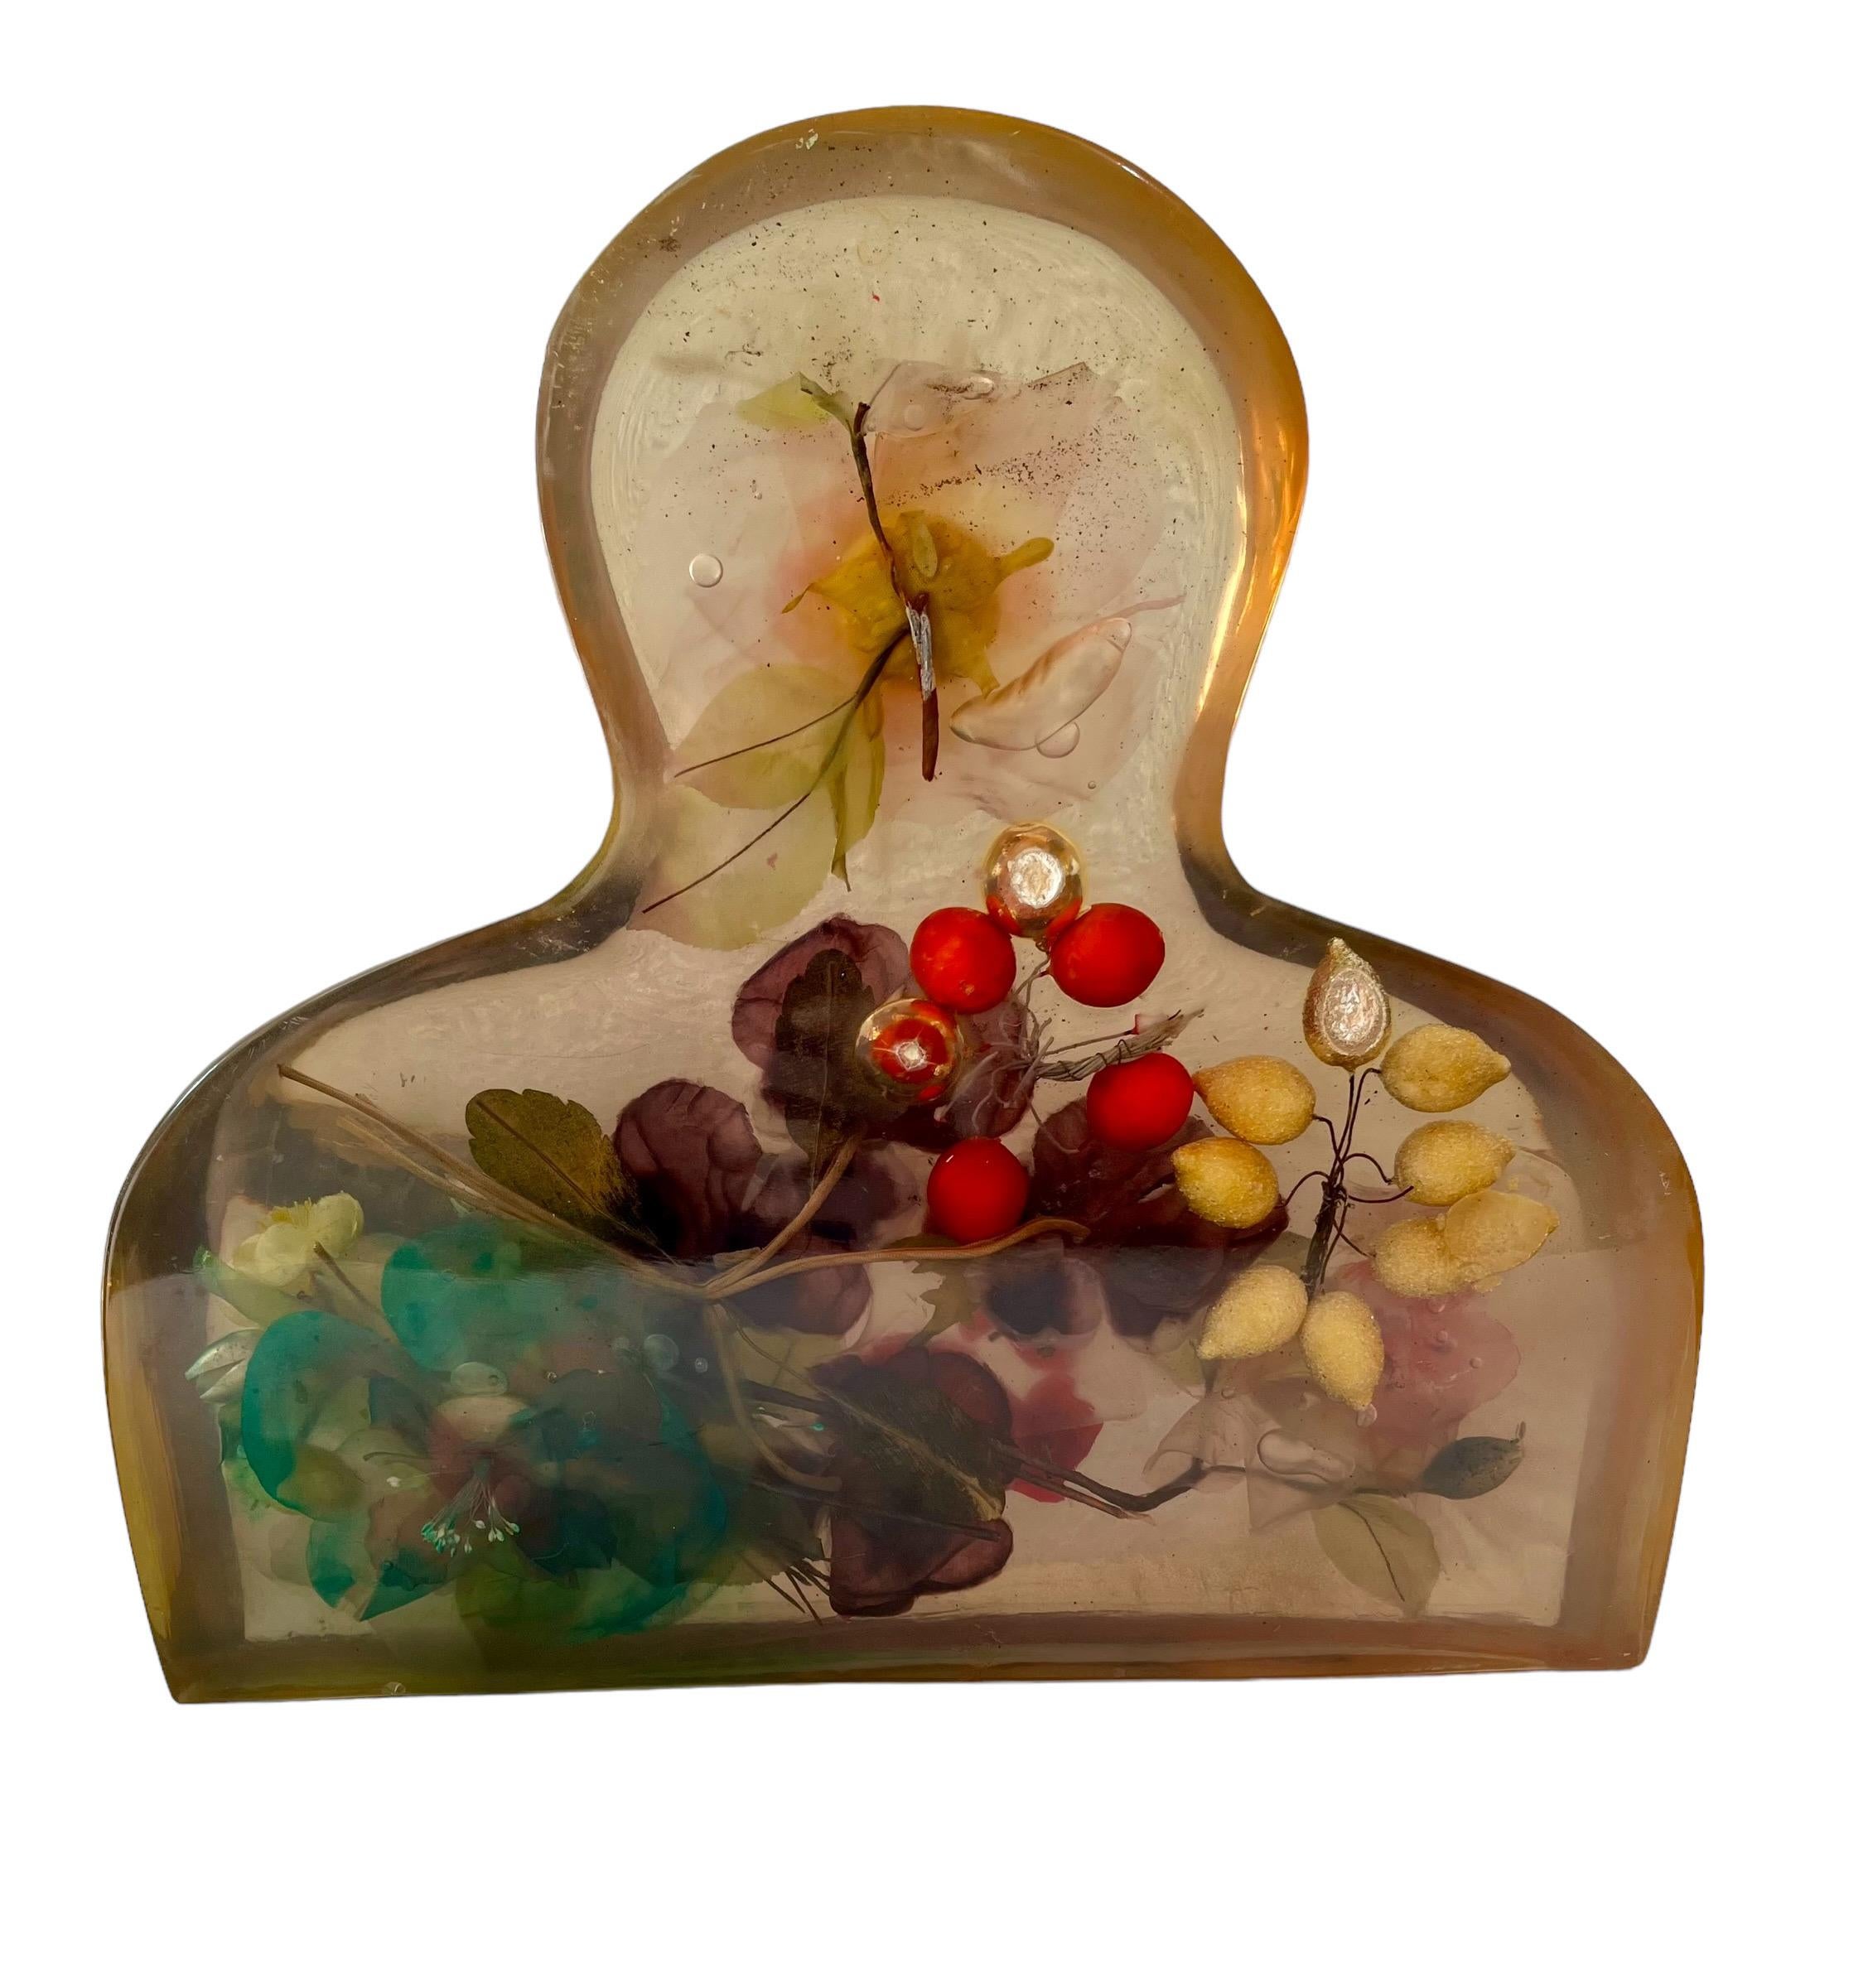 Italian artist Enrico Baj (1924-2003). 
Perspex (acrylic resin) Inclusion Sculpture with flowers and fruit
13.5 X 14 X 4 inches
Hand signed and marked AP
this is not dated.

Baj was born in Milan into a wealthy family, but left Italy in 1944 having